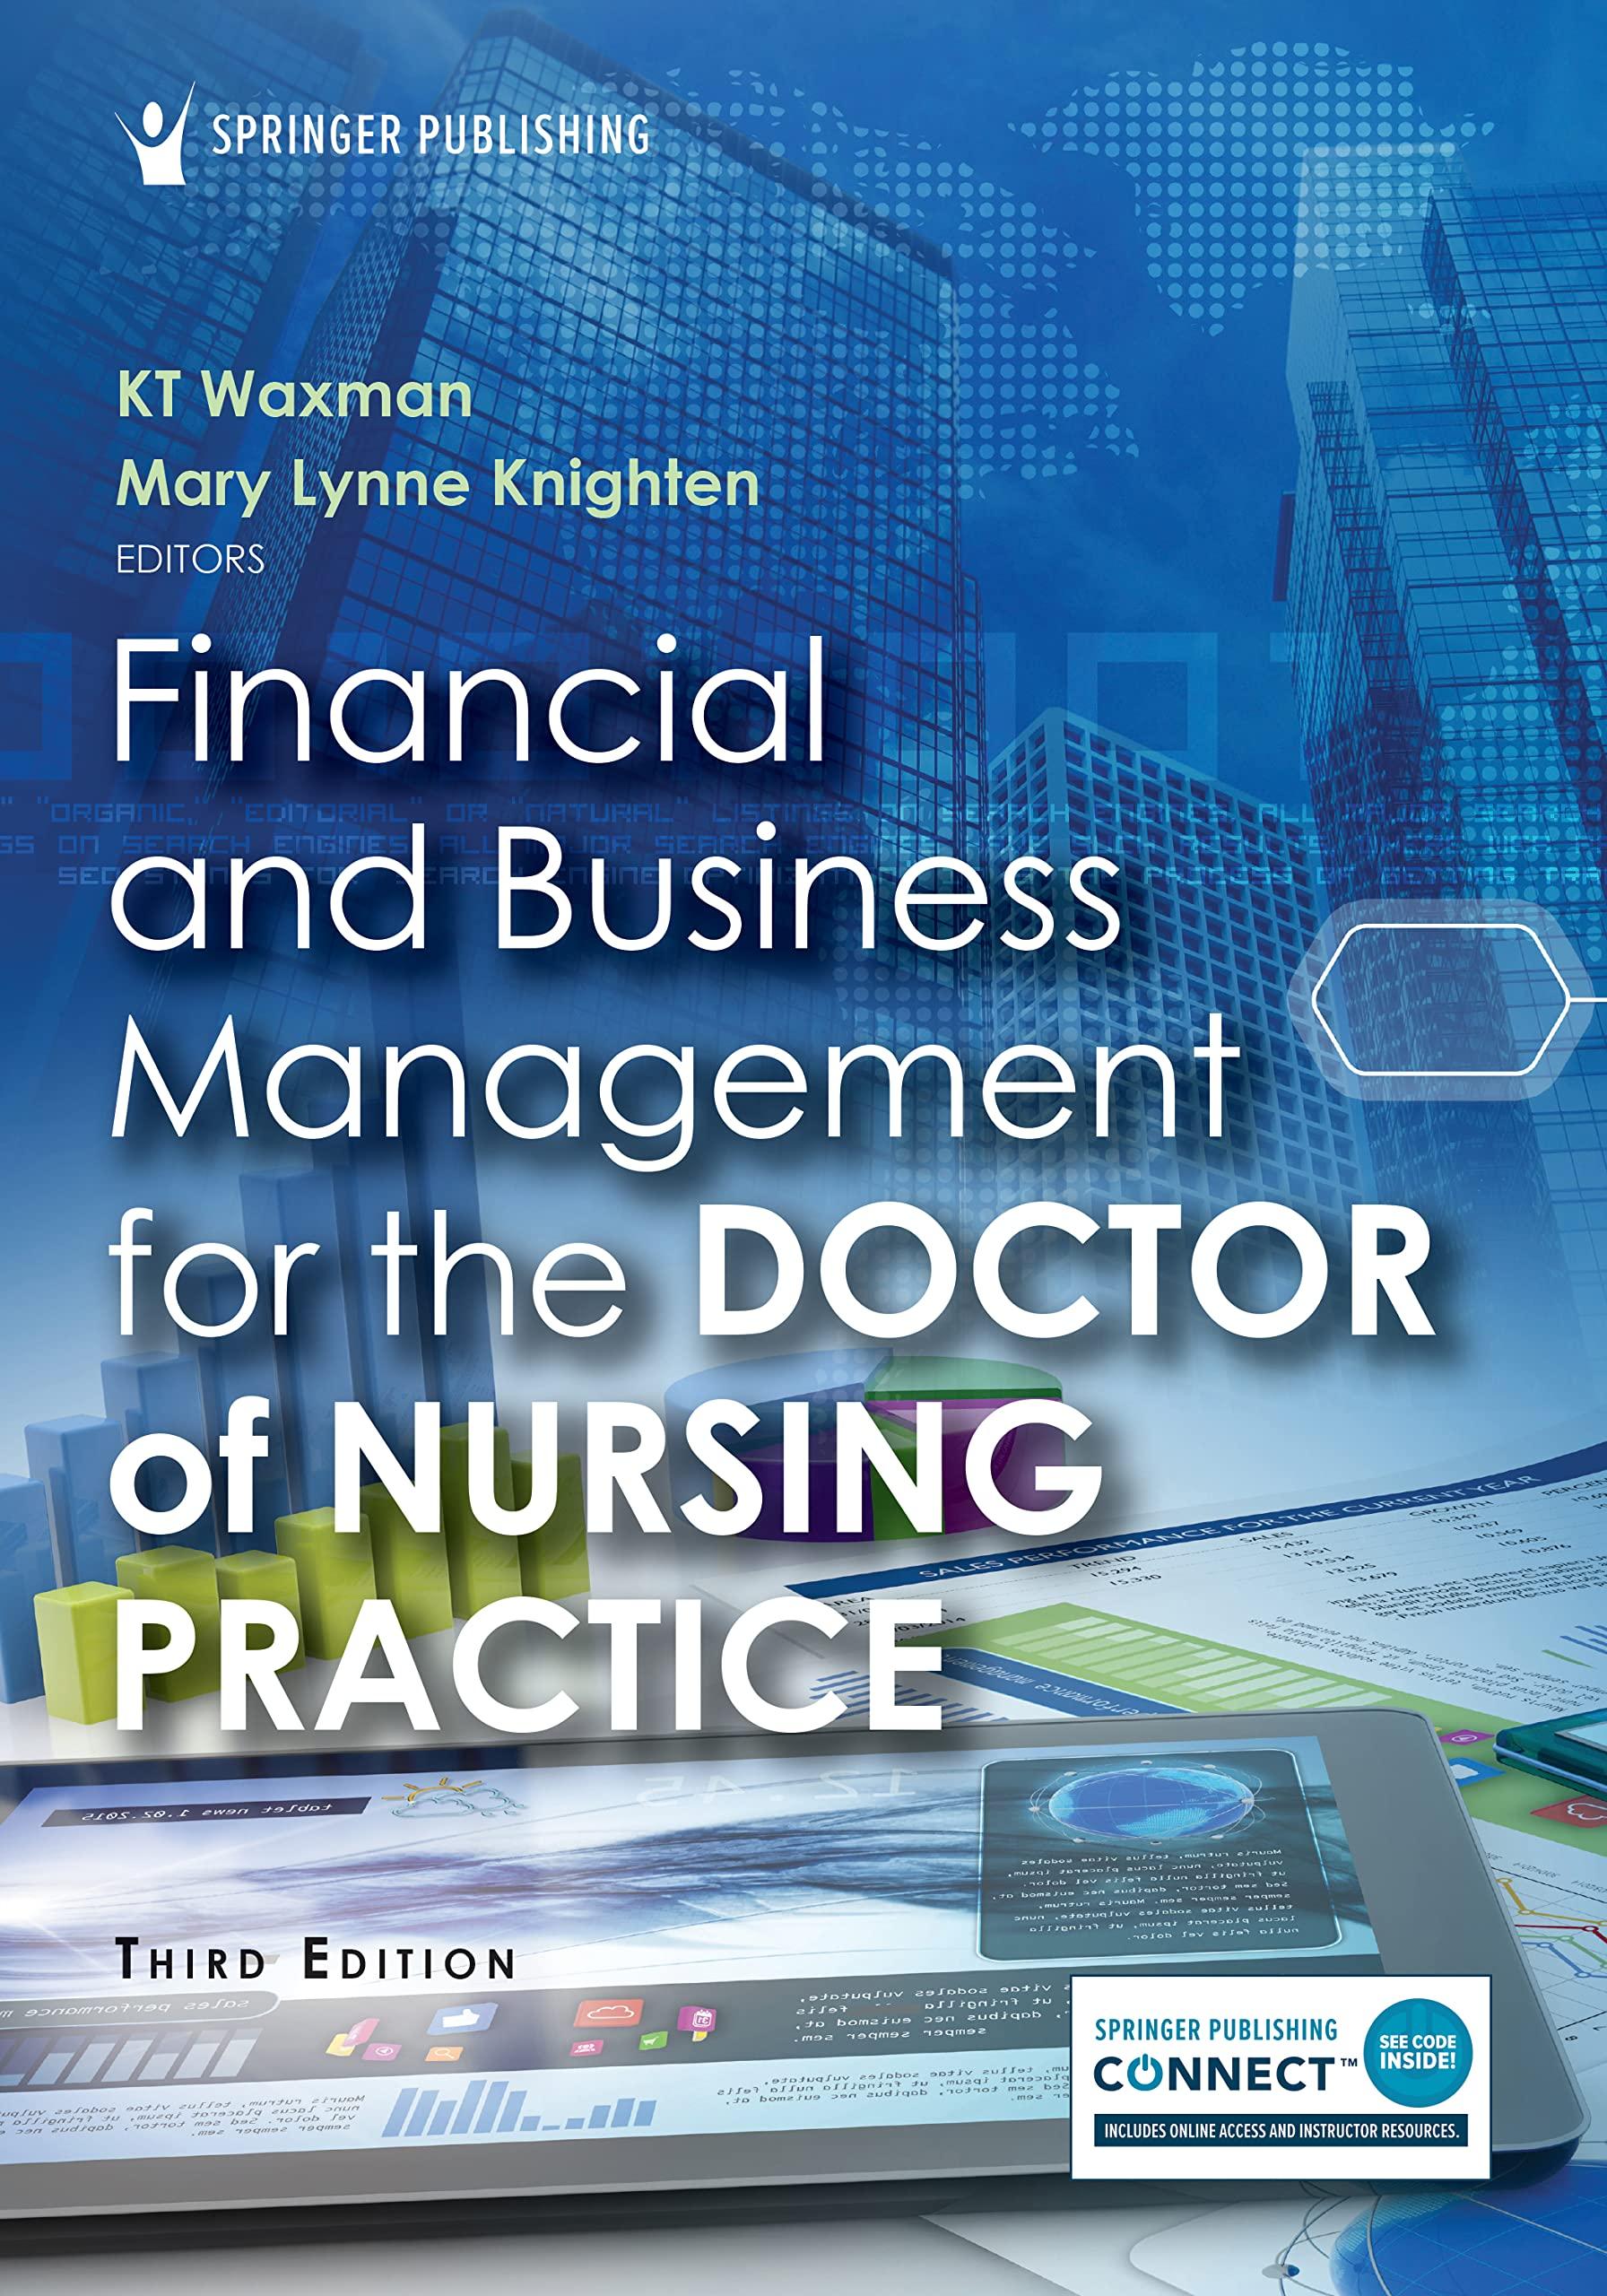 financial and business management for the doctor of nursing practice 3rd edition kt waxman, mary lynne